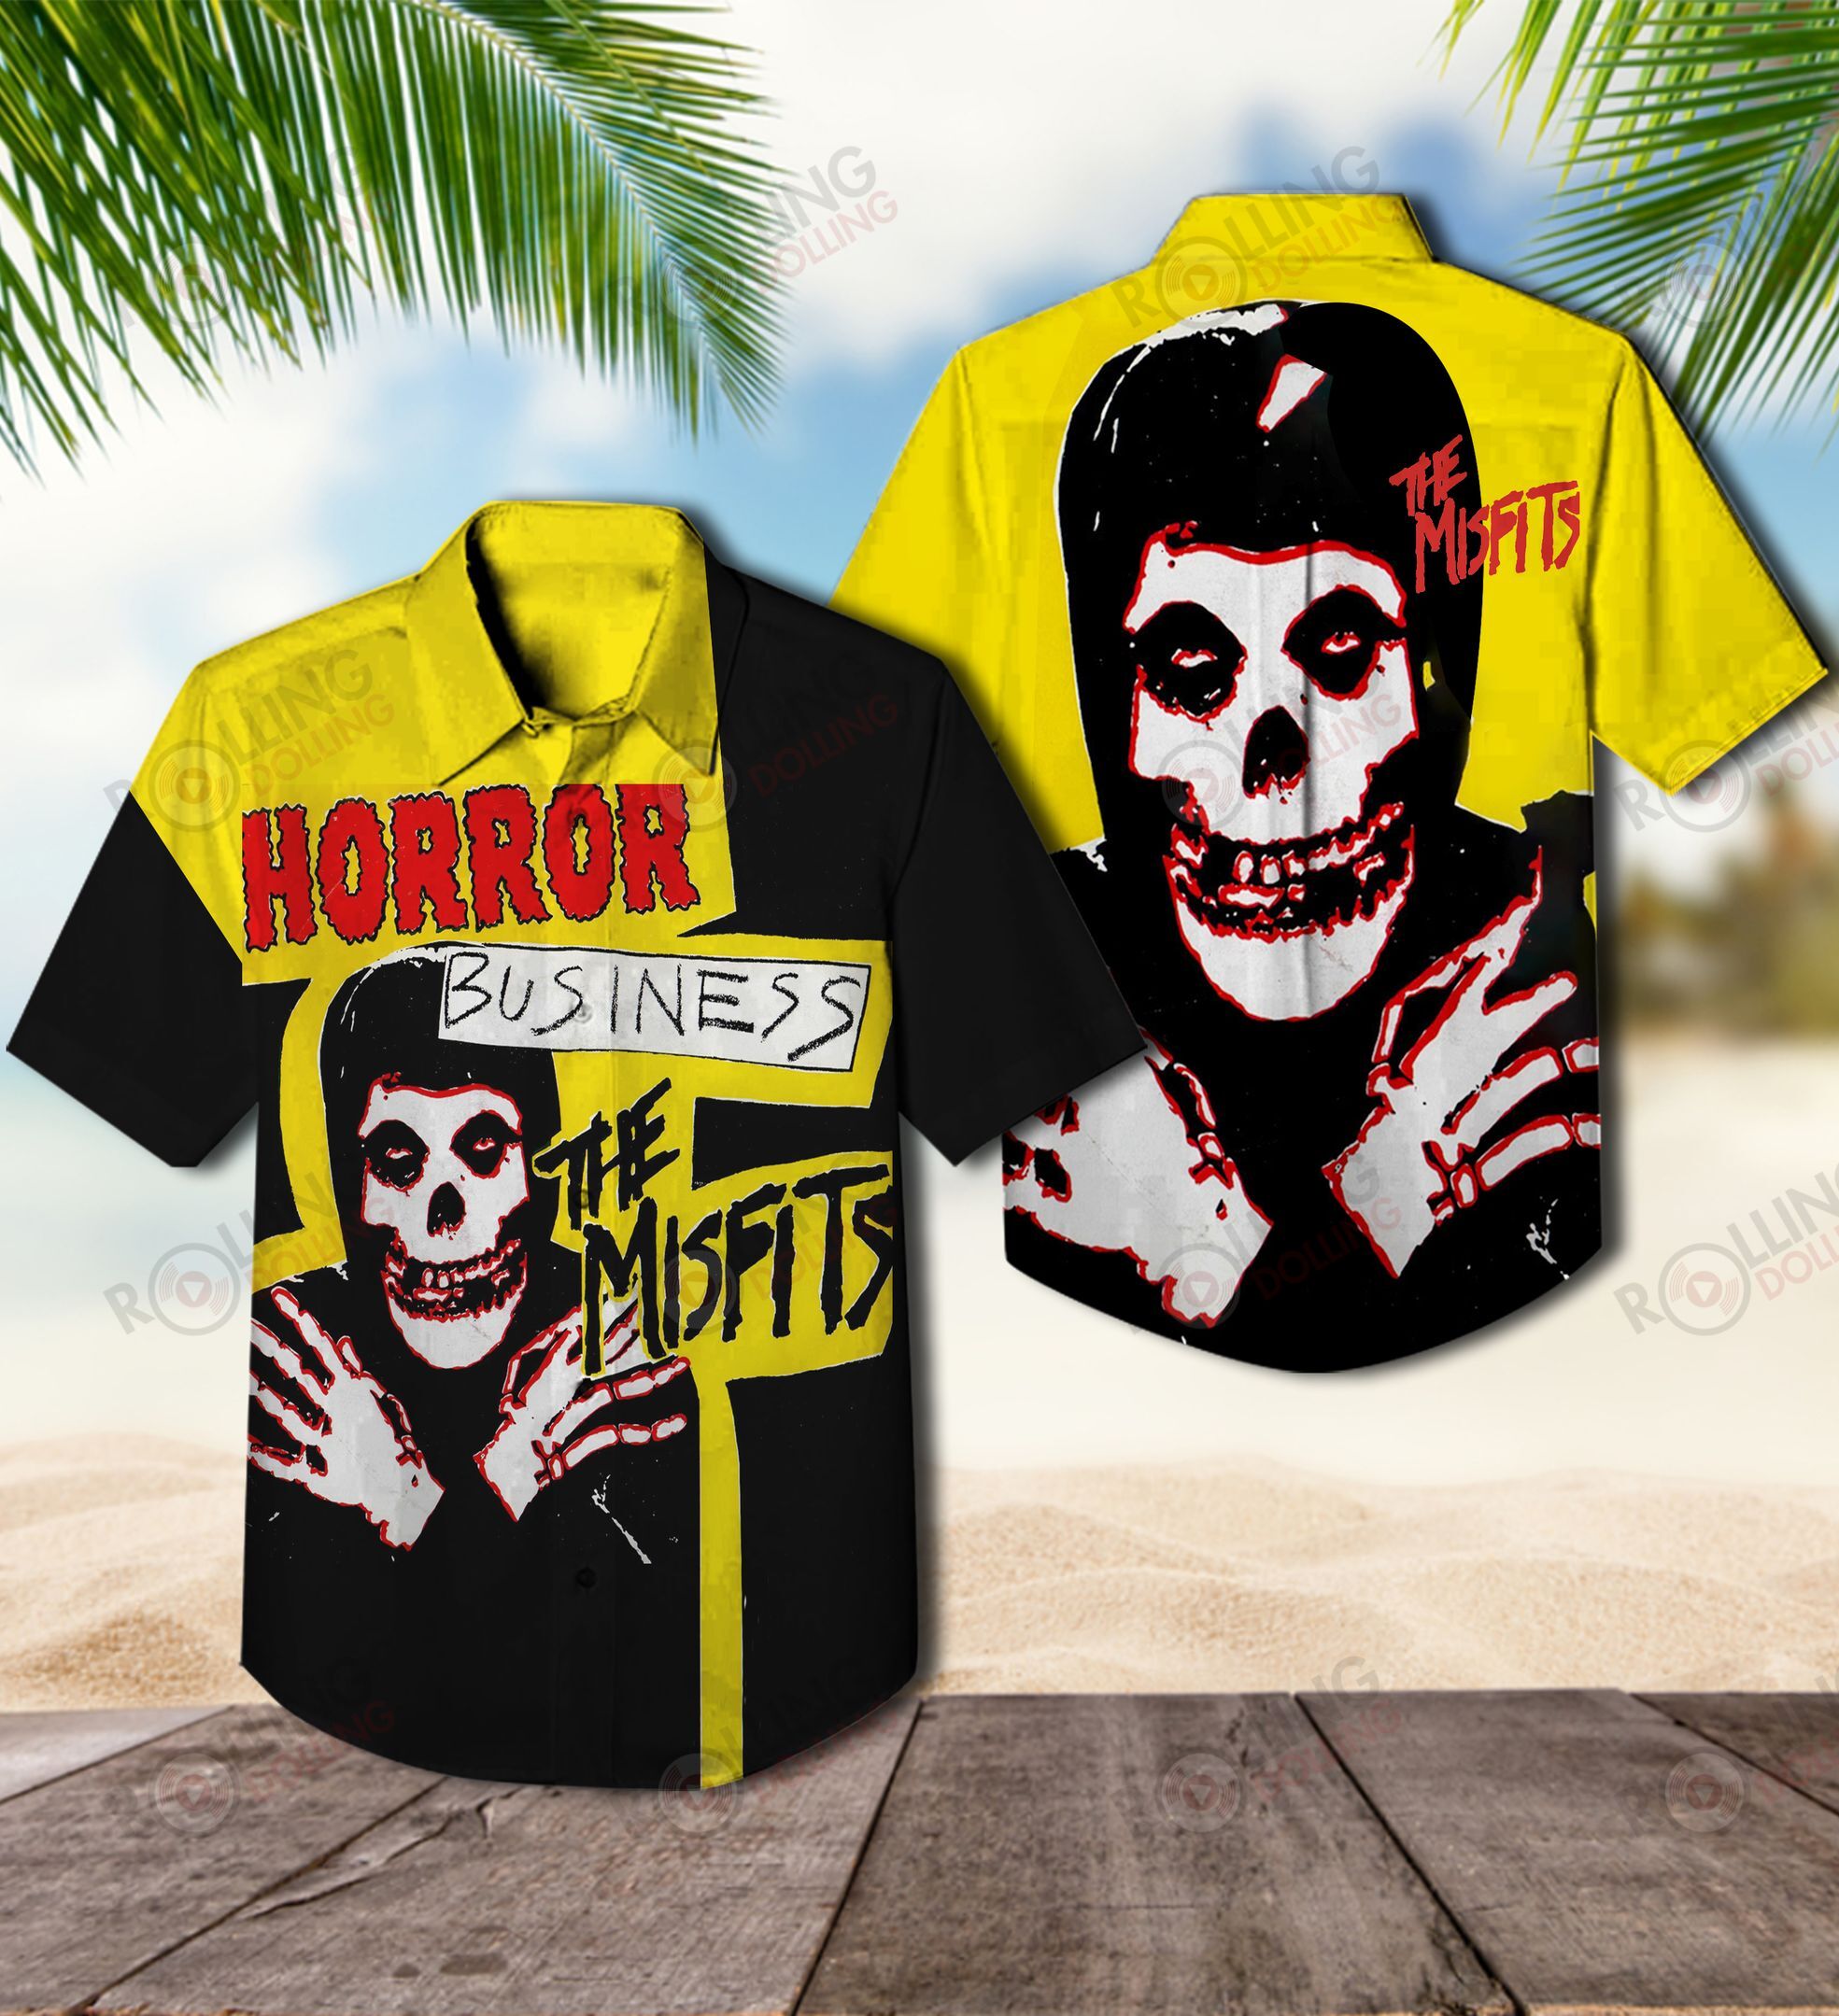 Now you can show off your love of all things band with this Hawaiian Shirt 73